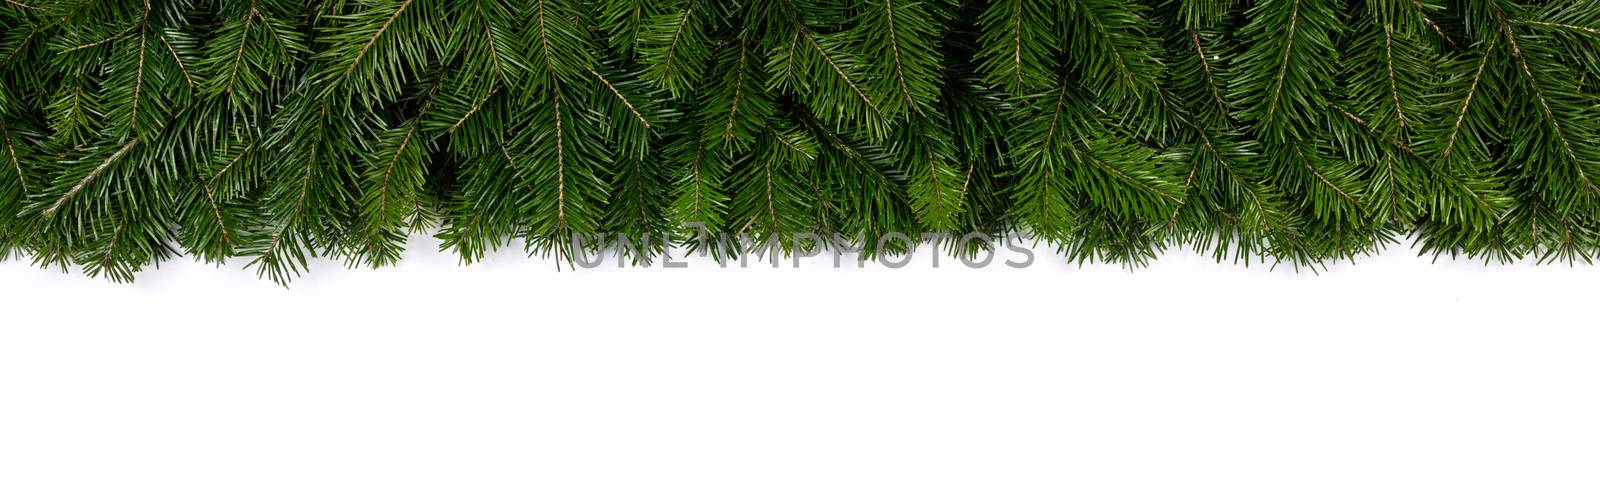 Christmas fir tree on white background by Yellowj